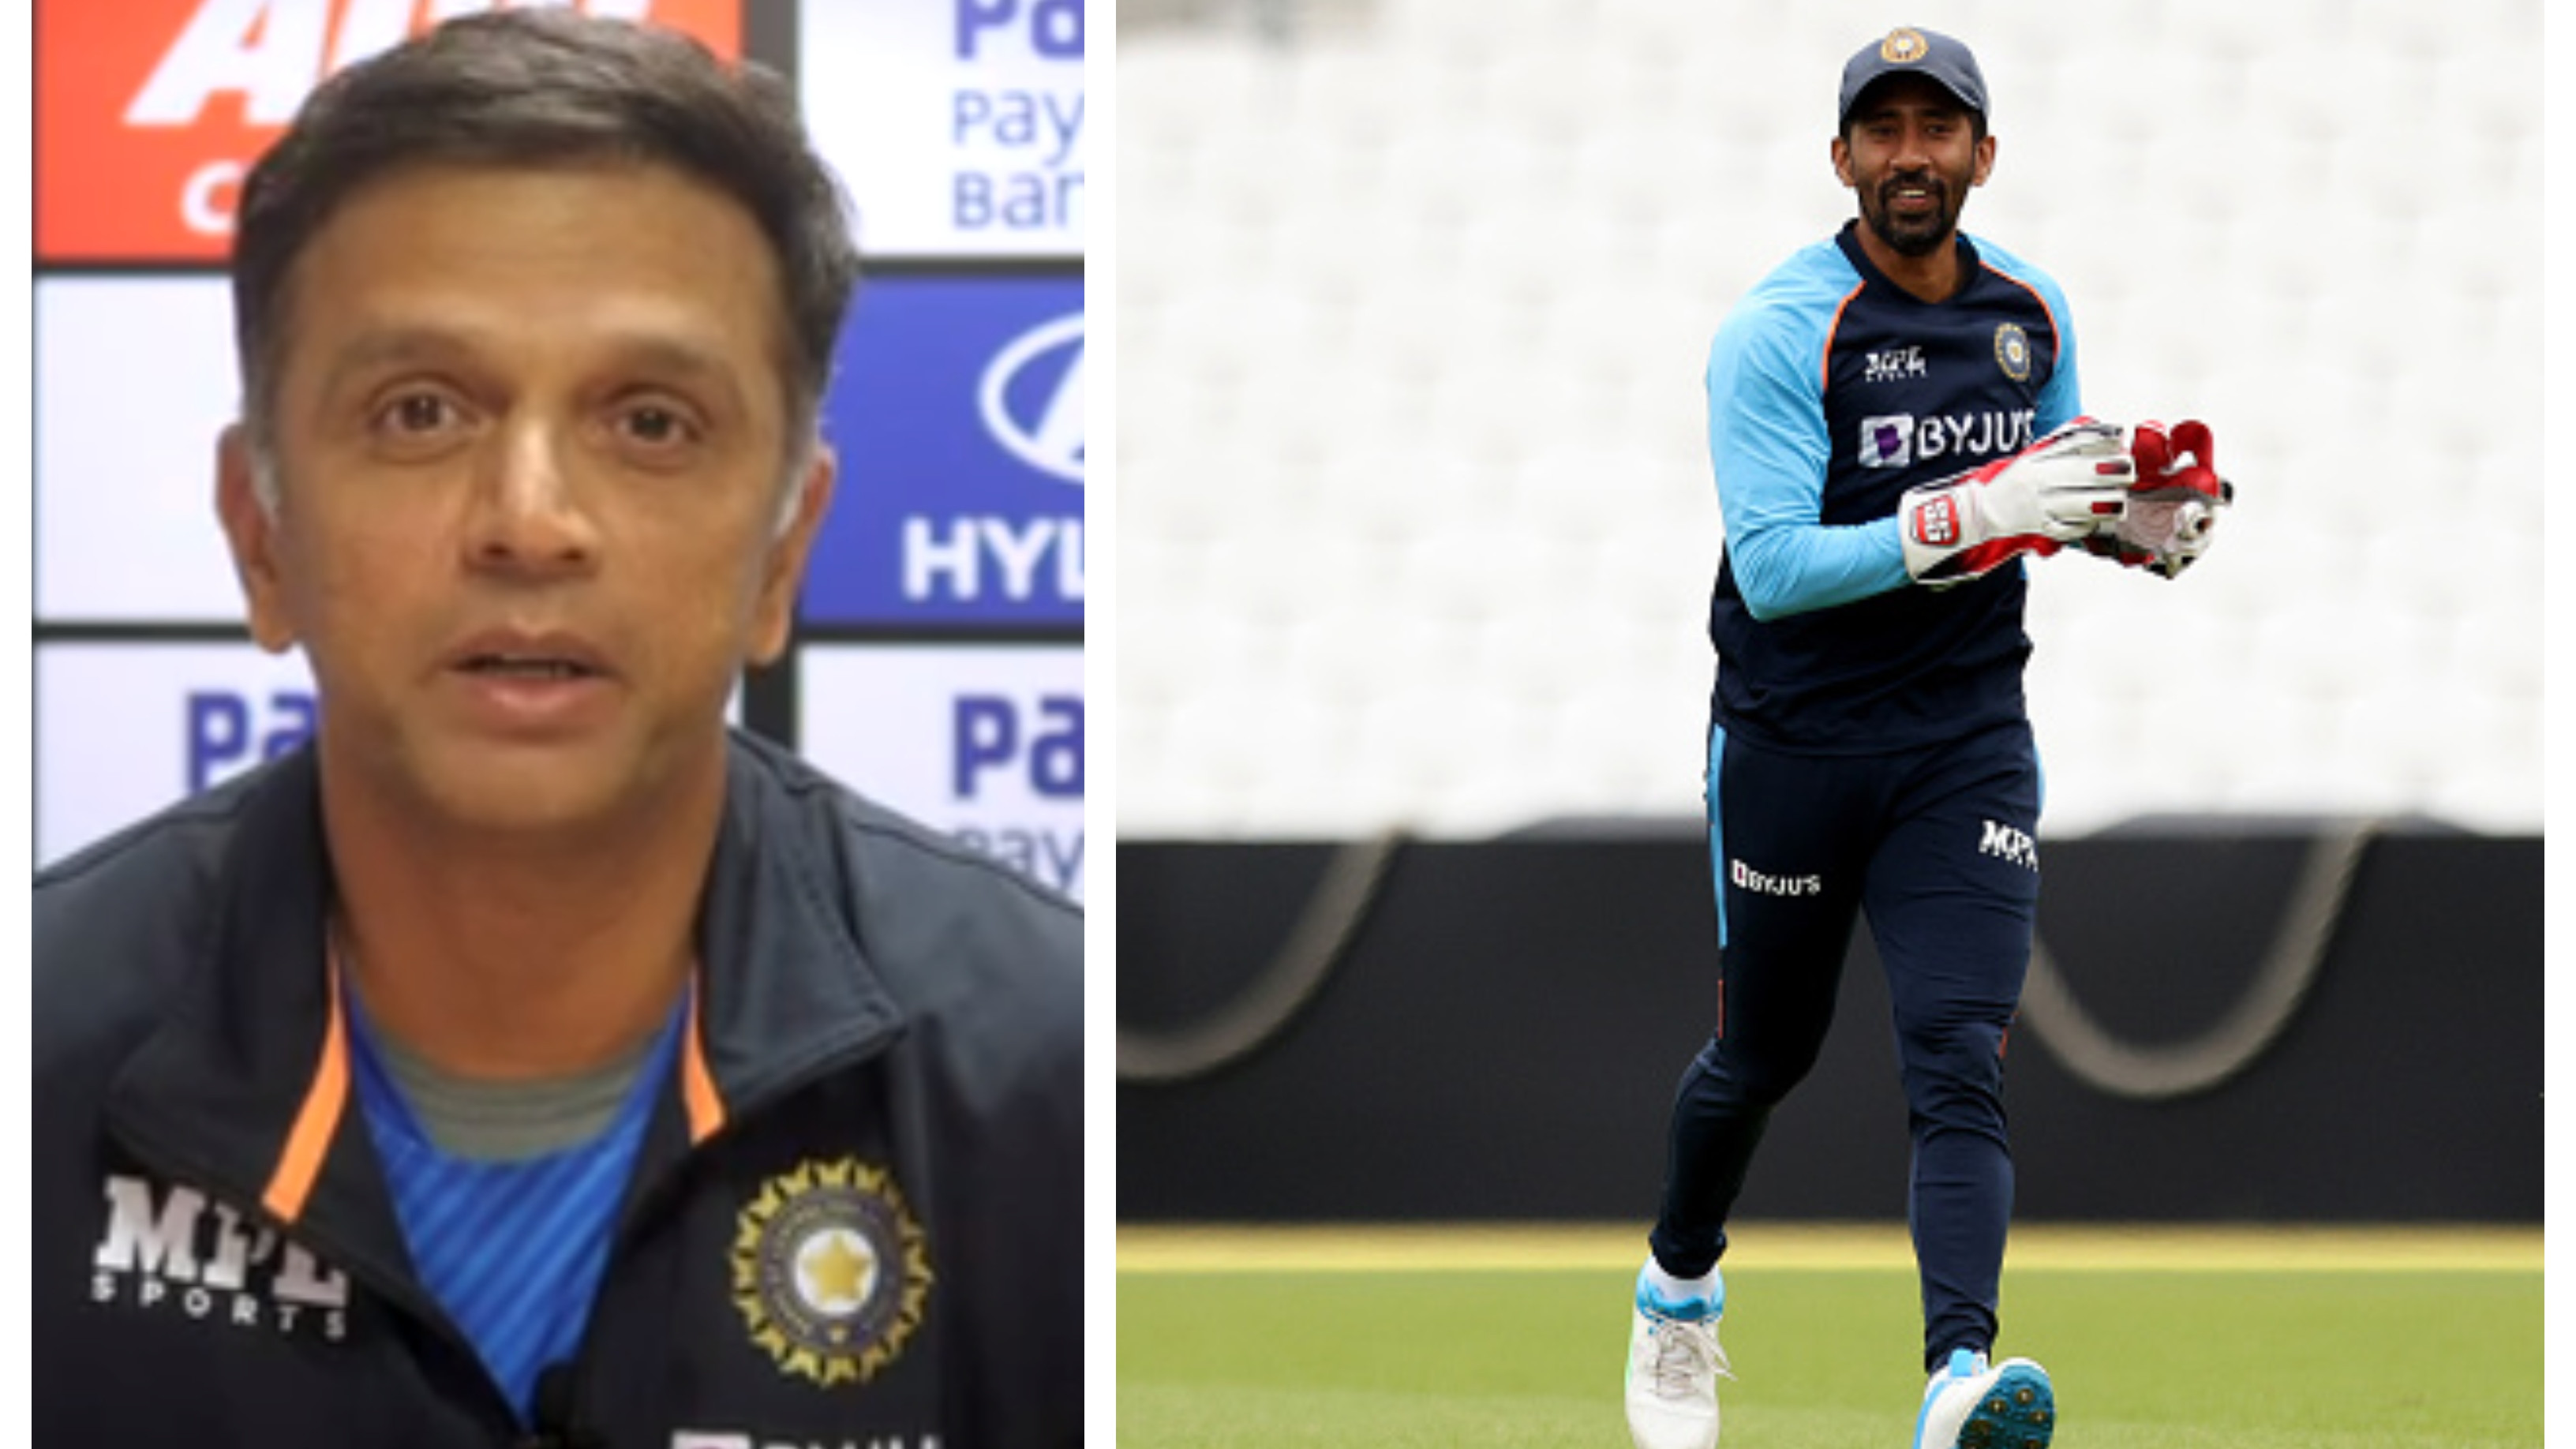 Rahul Dravid ‘not hurt’ by Wriddhiman Saha’s comments, says the veteran wicketkeeper deserved clarity